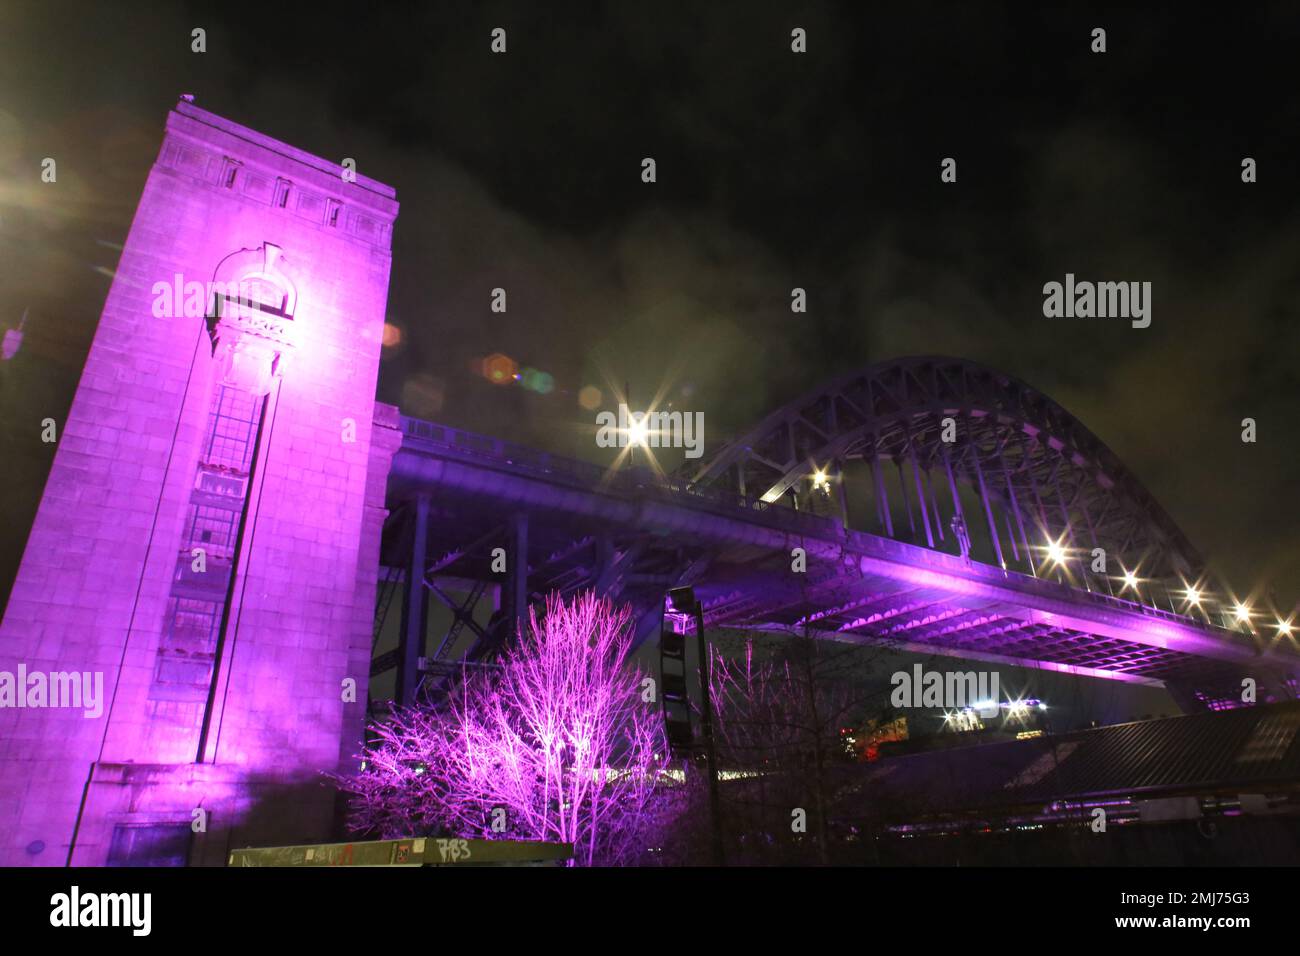 Newcastle, UK. 27th Jan 2023. Holocaust Memorial Day 2023, The theme of Holocaust Memorial Day 2023 is: ‘Ordinary People’ The Tyne Bridge, Millennium Bridge lit up to mark Holocaust Memorial Day, the River Tyne in a purple hue. Newcastle Civic Centre lit in memory of victims of the Holocaust and other genocides, in tribute to the survivors and to take a stand against prejudice, discrimination and hatred today, Newcastle upon Tyne, UK, 27th January 2023, Credit: DEW/Alamy Live News Stock Photo